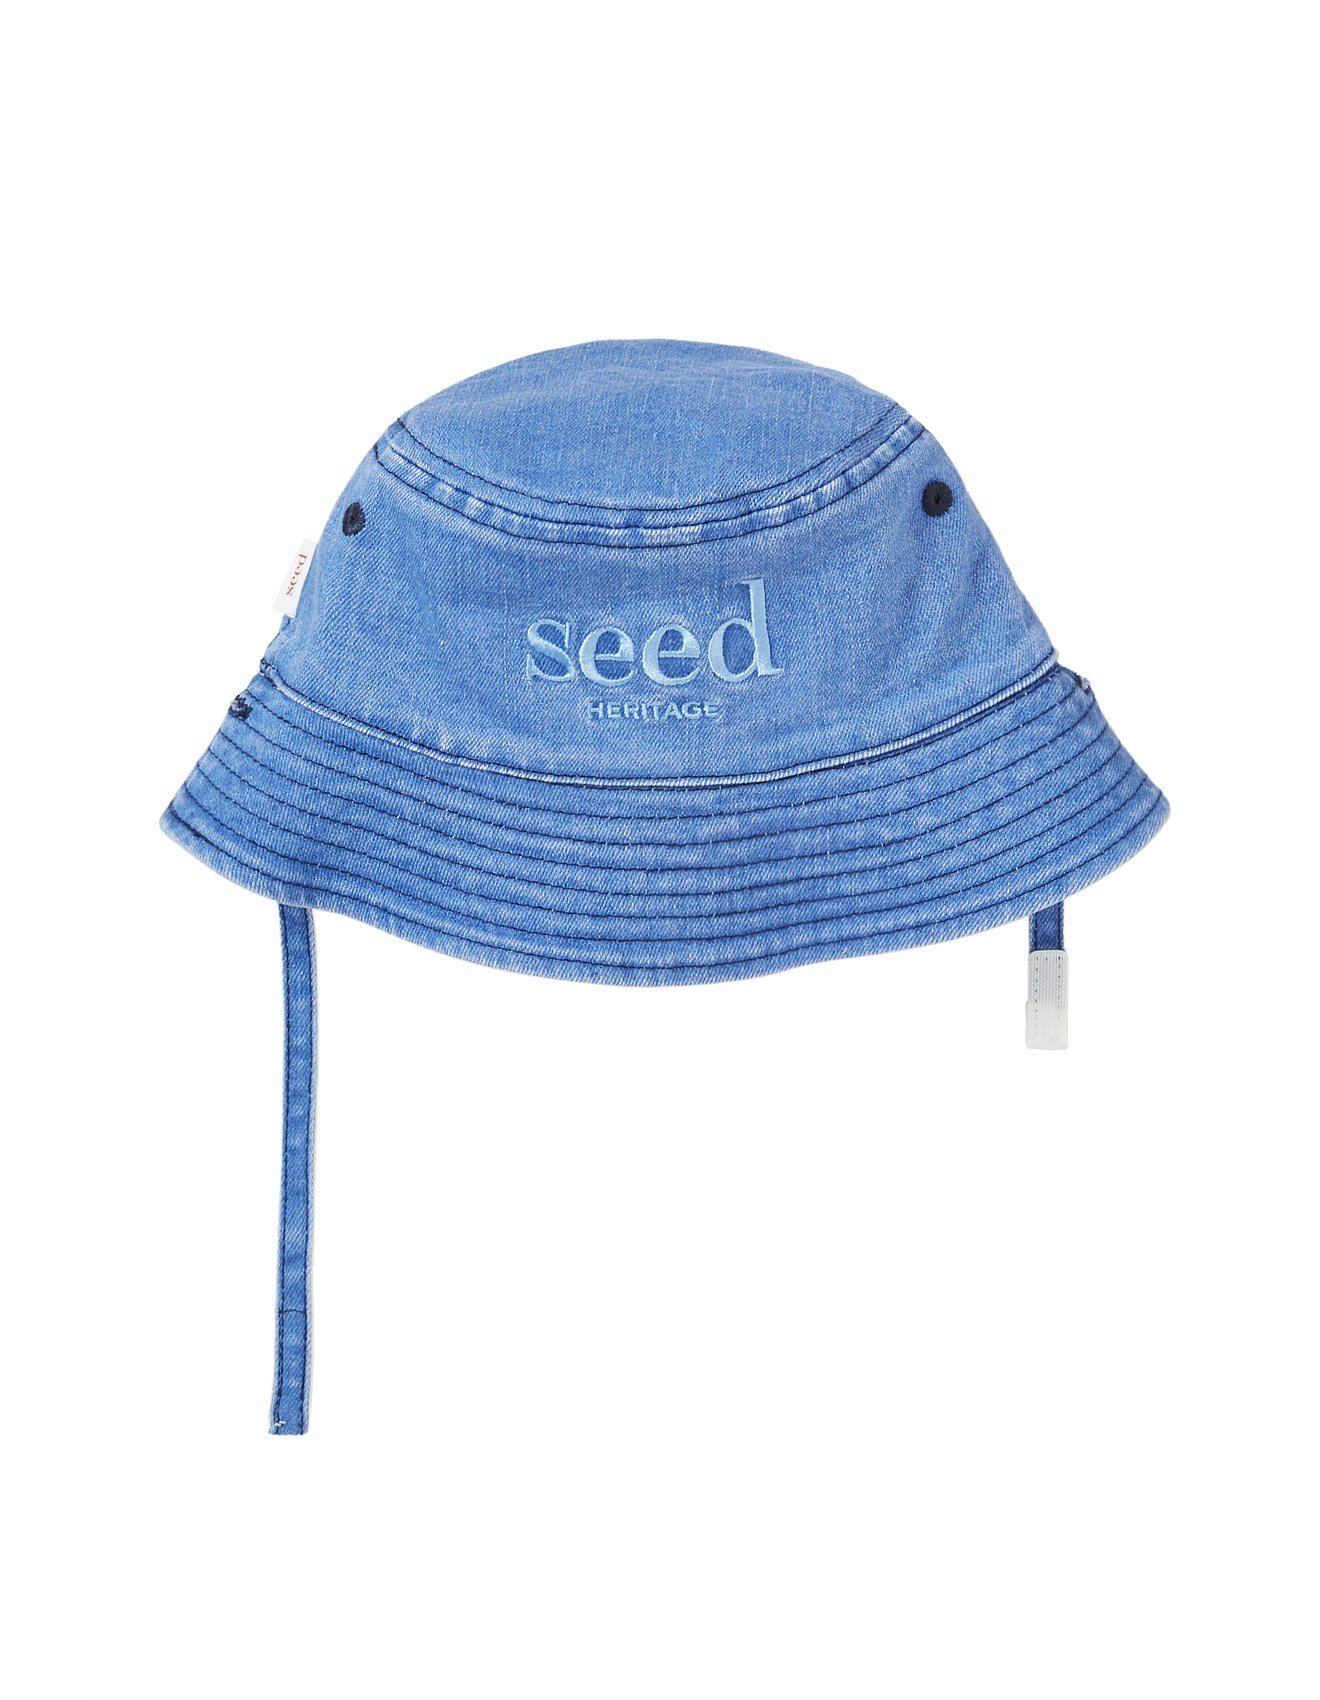 Seed+Heritage+Heritage+Bucket+Hat+in+Chambray.jpg